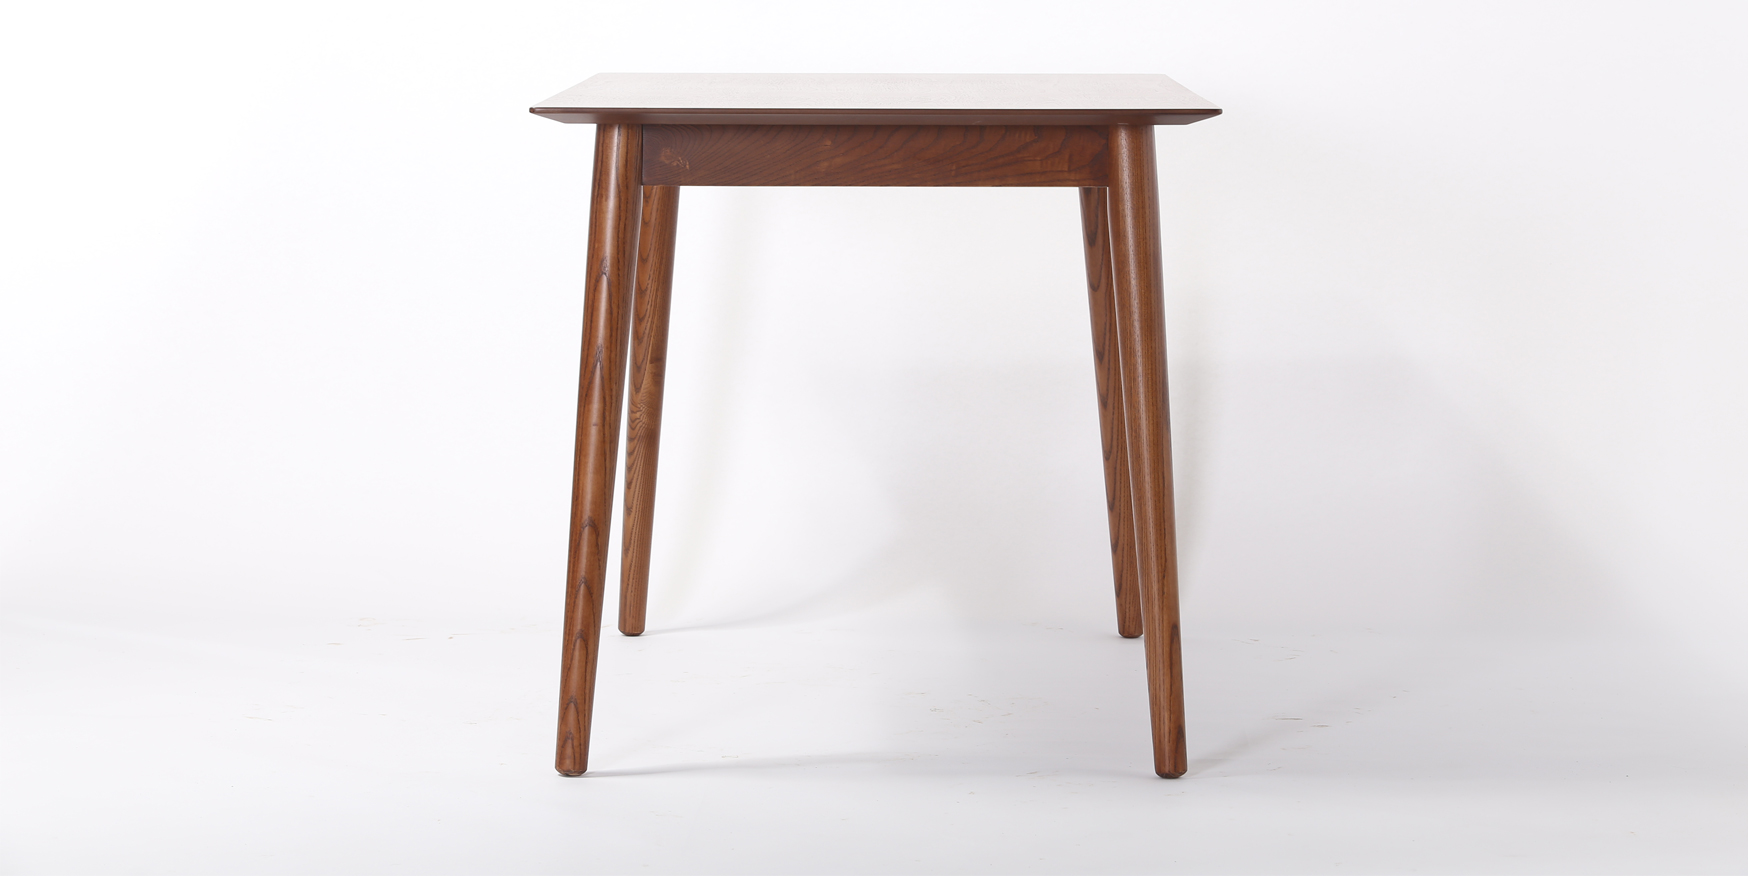 birch ply dining table
